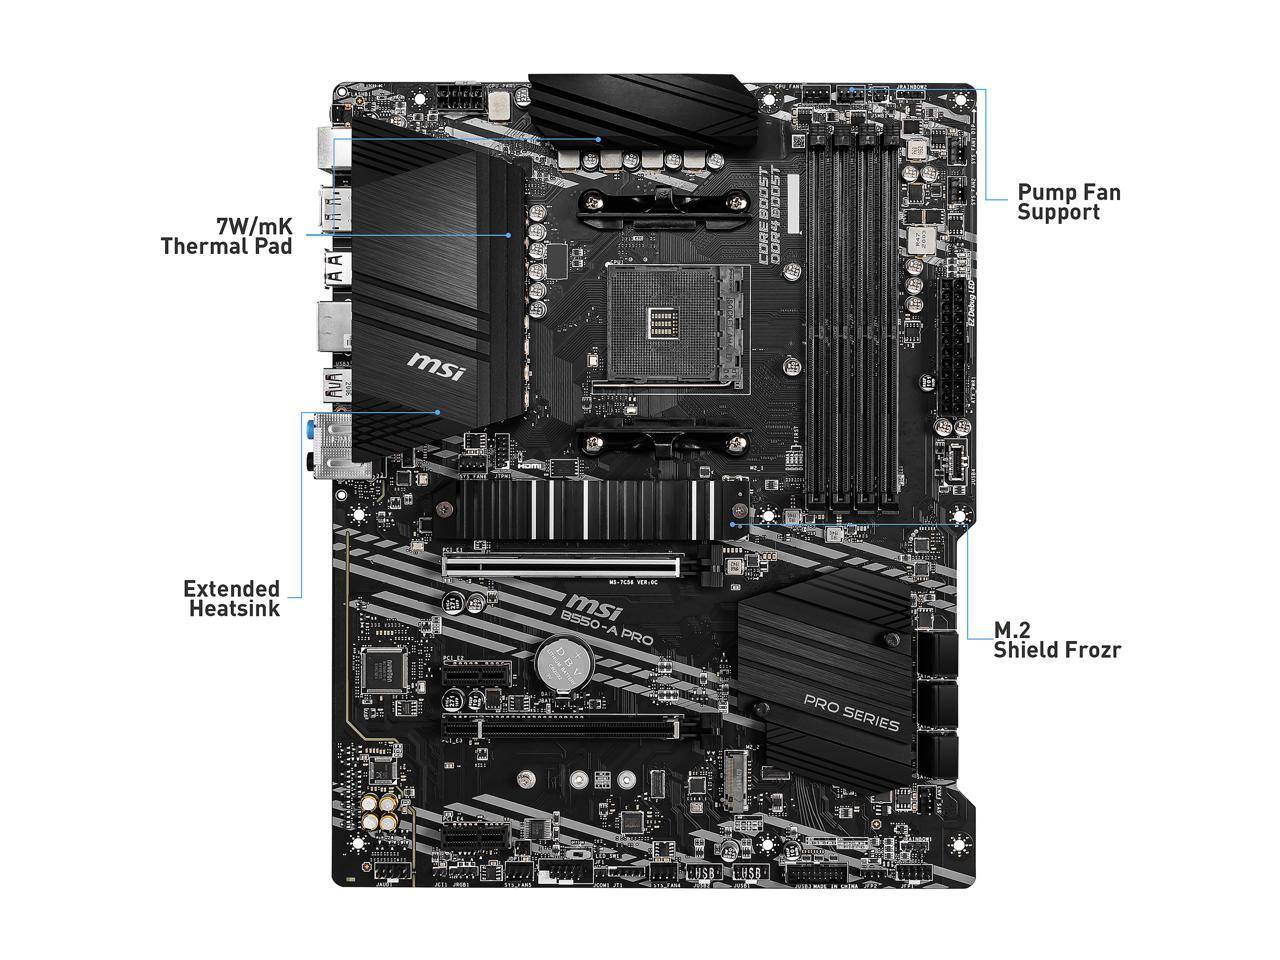 Newegg: MSI PRO B550-A PRO AM4 AMD B550 SATA 6Gb/s ATX AMD Motherboard for $129.99 after Promo Code + FS